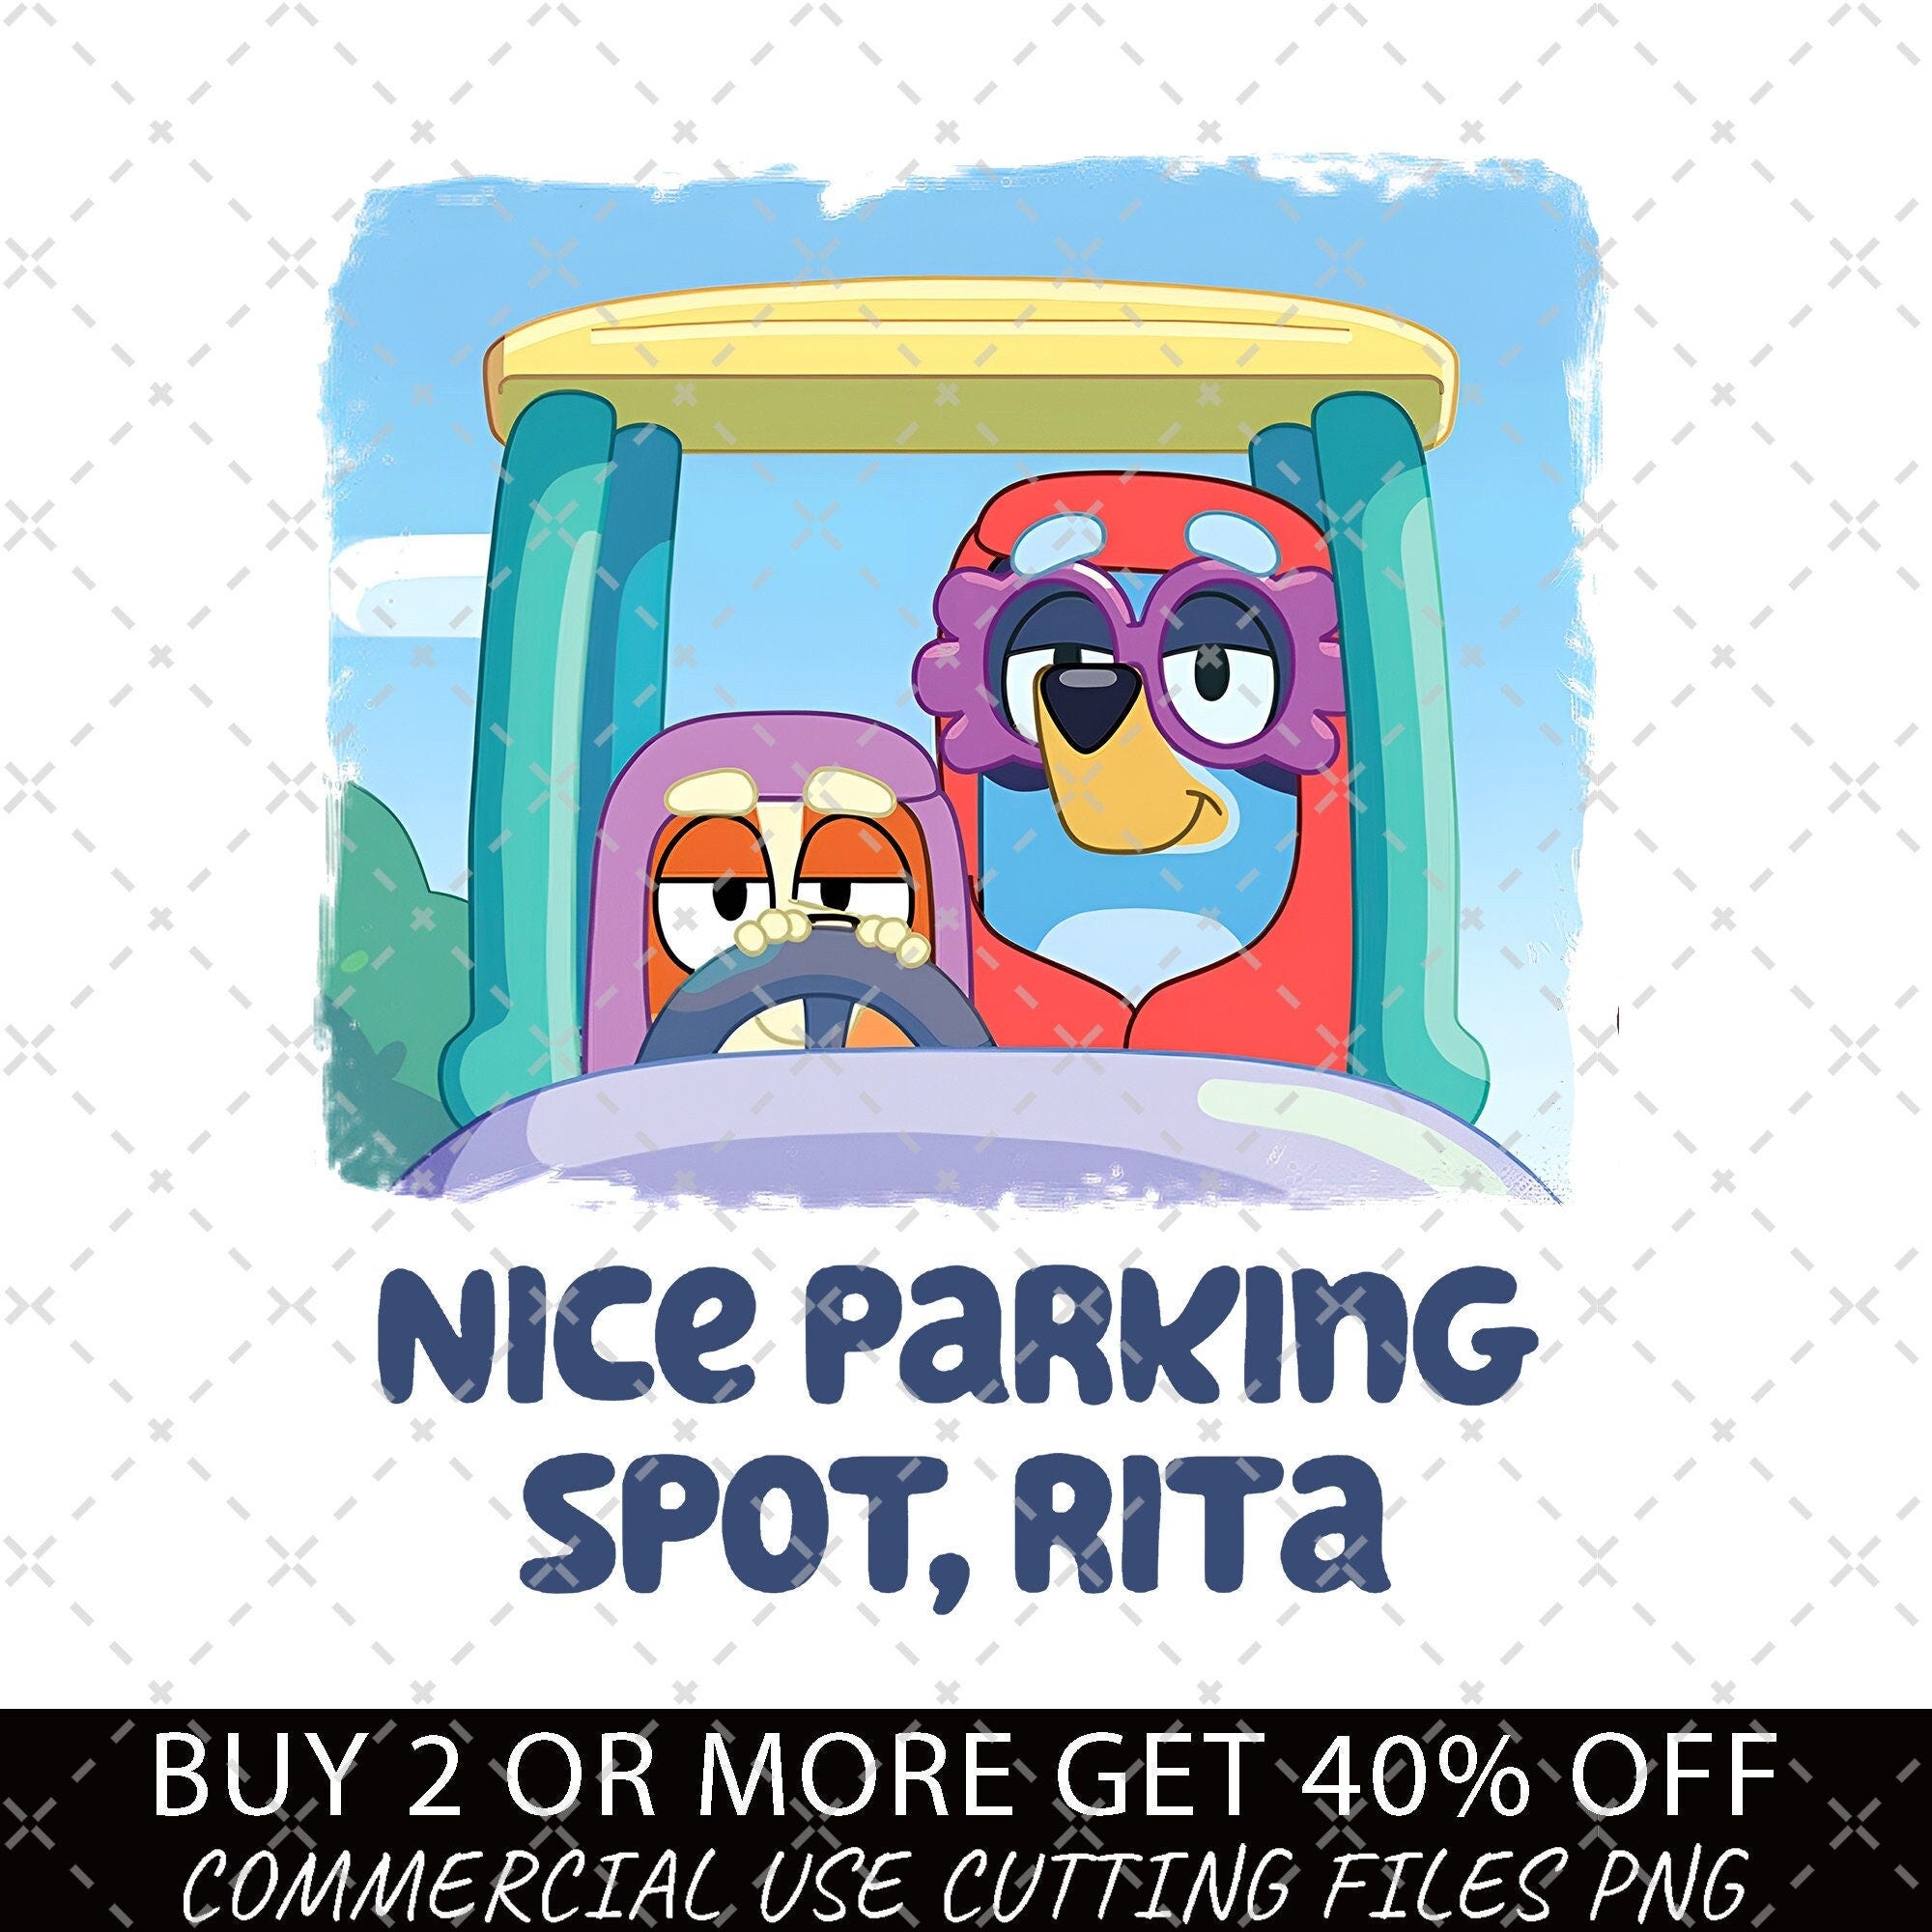 Nice Parking Spot Rita PNG, Bluey Family Png, Decal Files, Vinyl Stickers, Car Image, Bluey Dad PNG, Bluey Mom Png, Bluey Friends, Bluey PNG